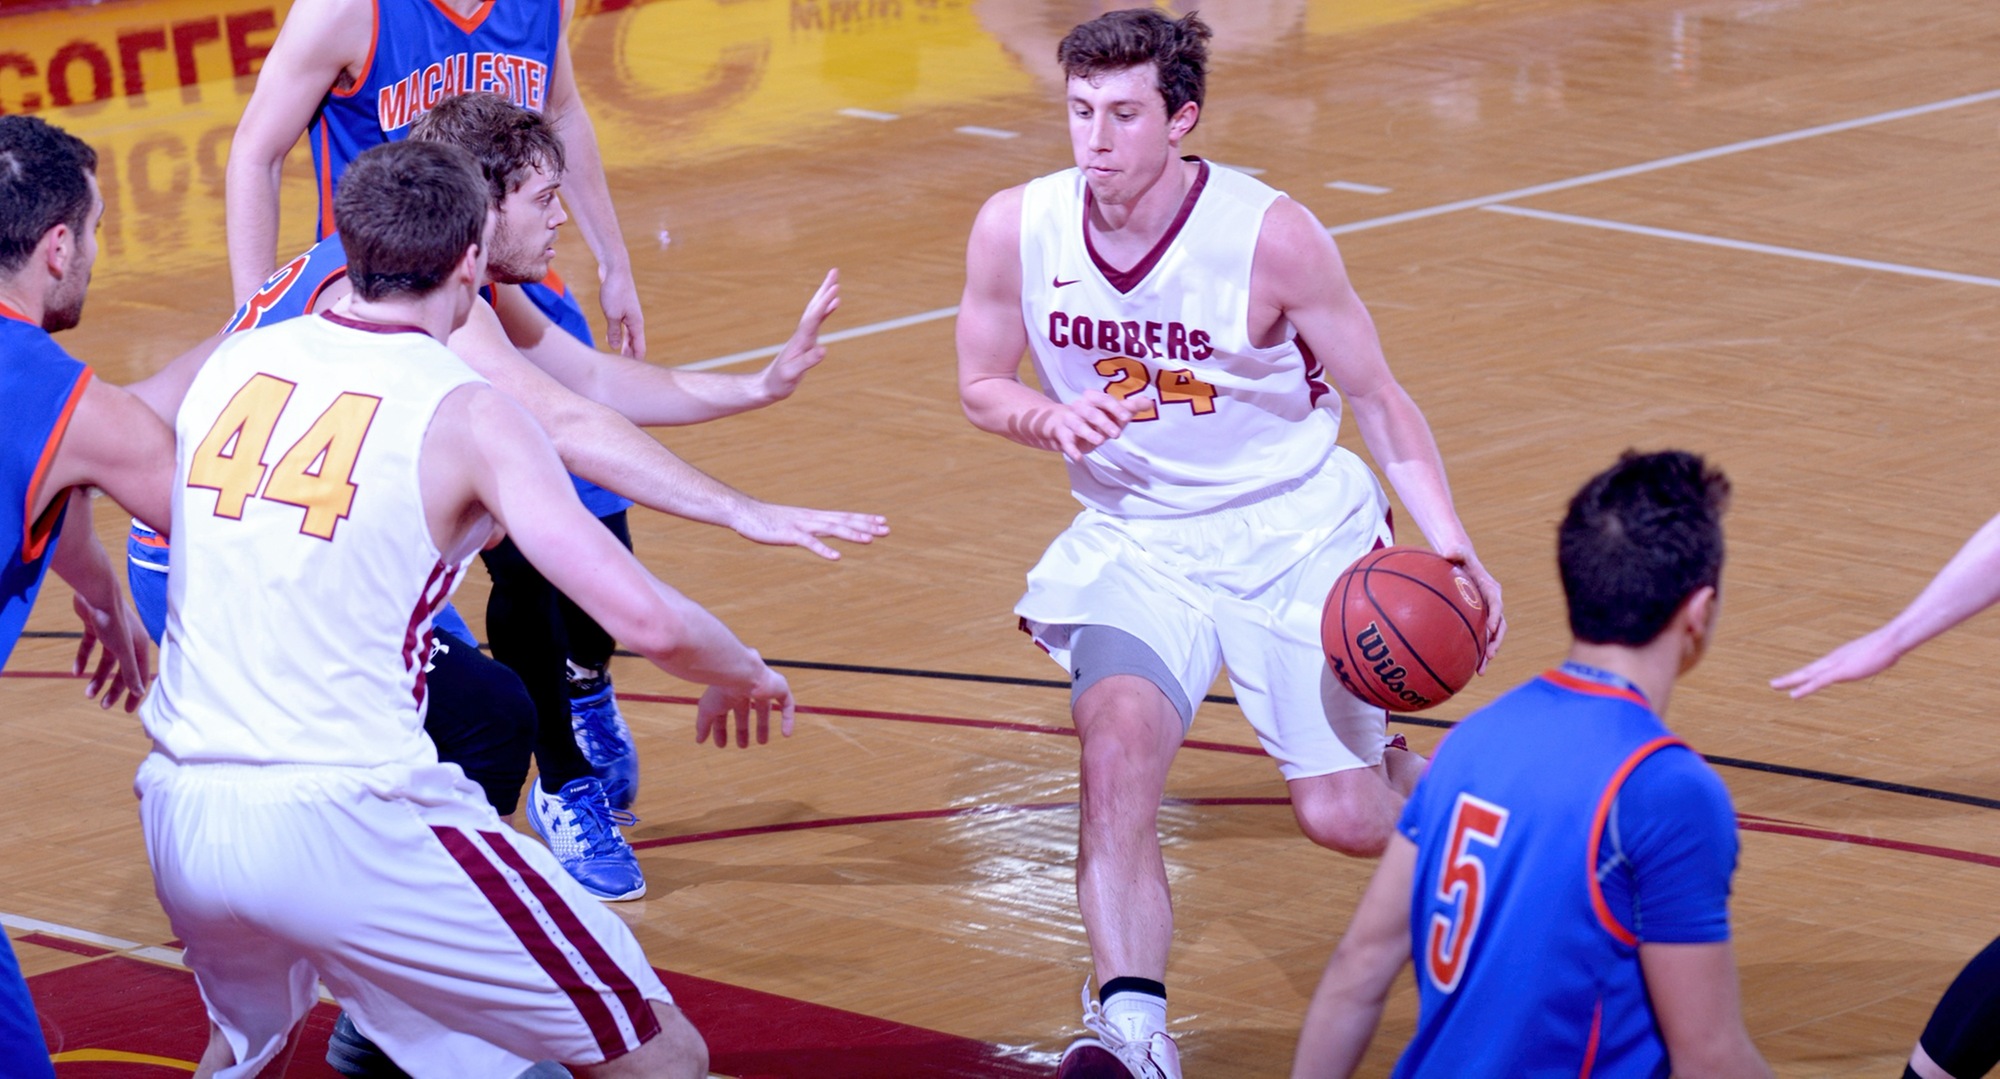 Senior Austin Nelson put up his third 20-point game of the season as he scored 20 points in the Cobbers' 85-72 win at Macalester.